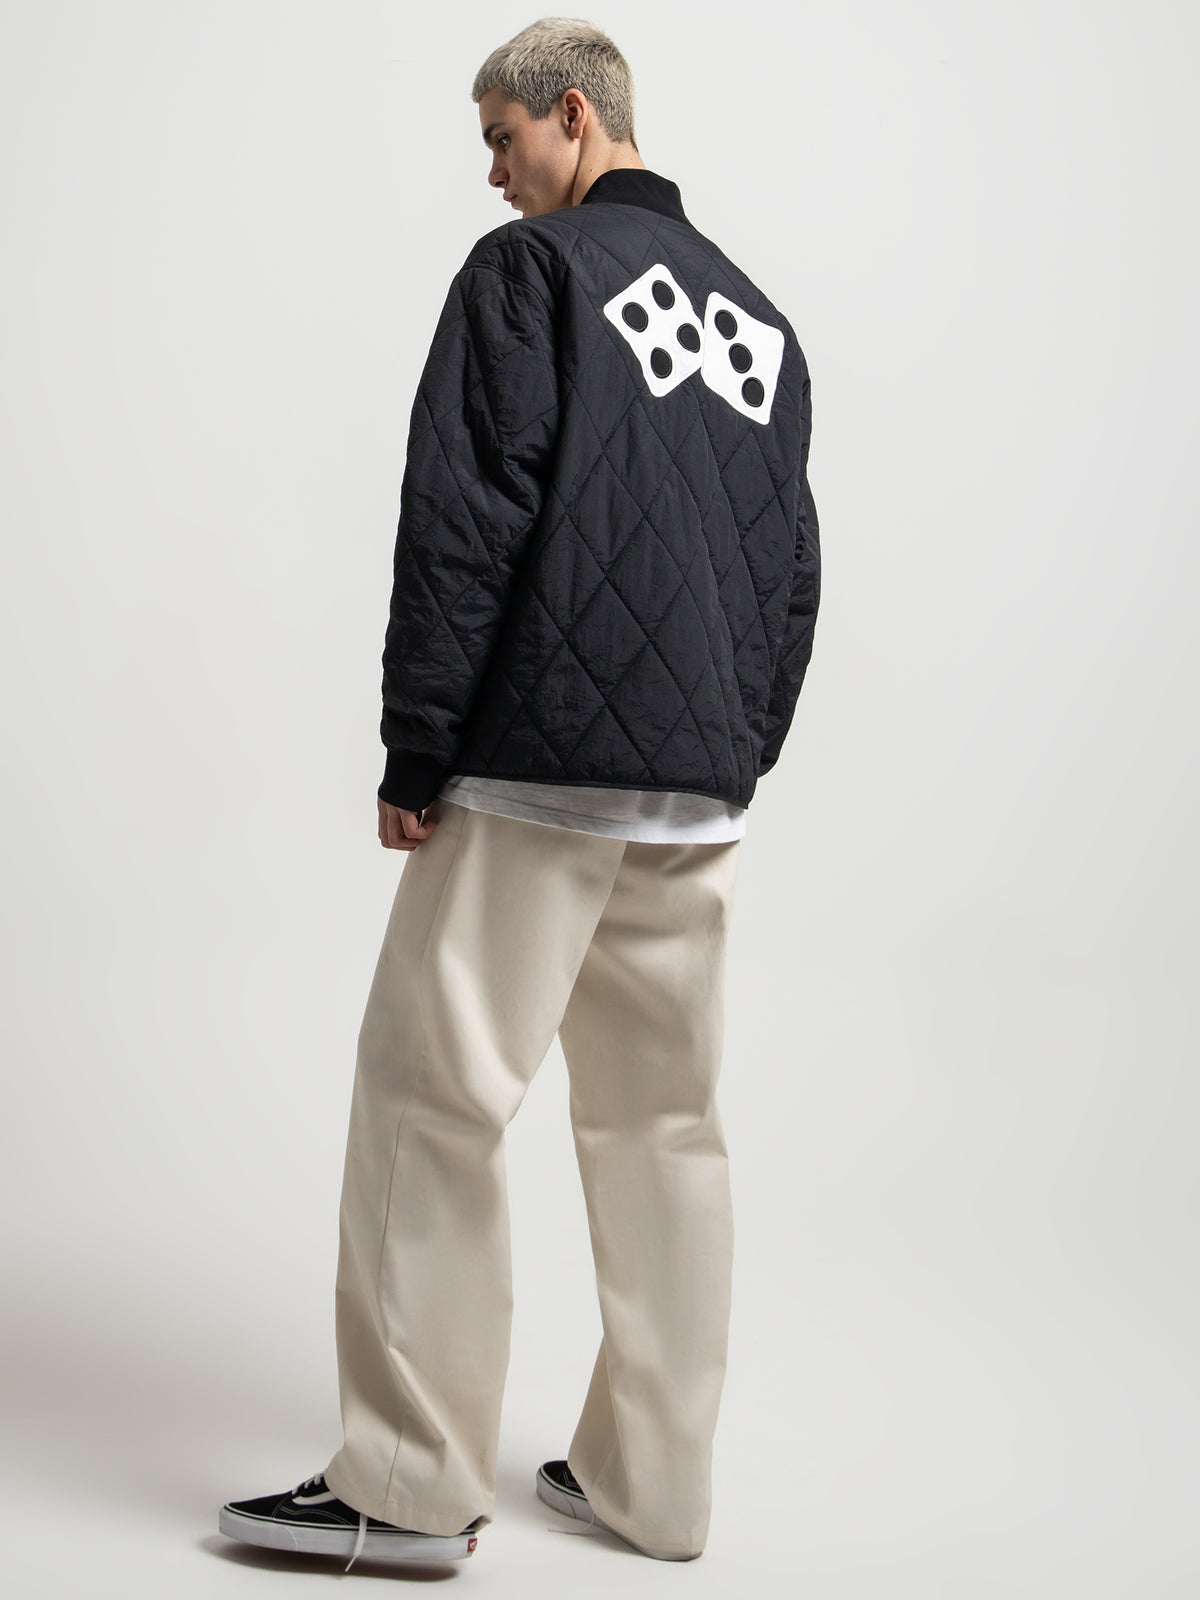 Dice Quilted Jacket in Black